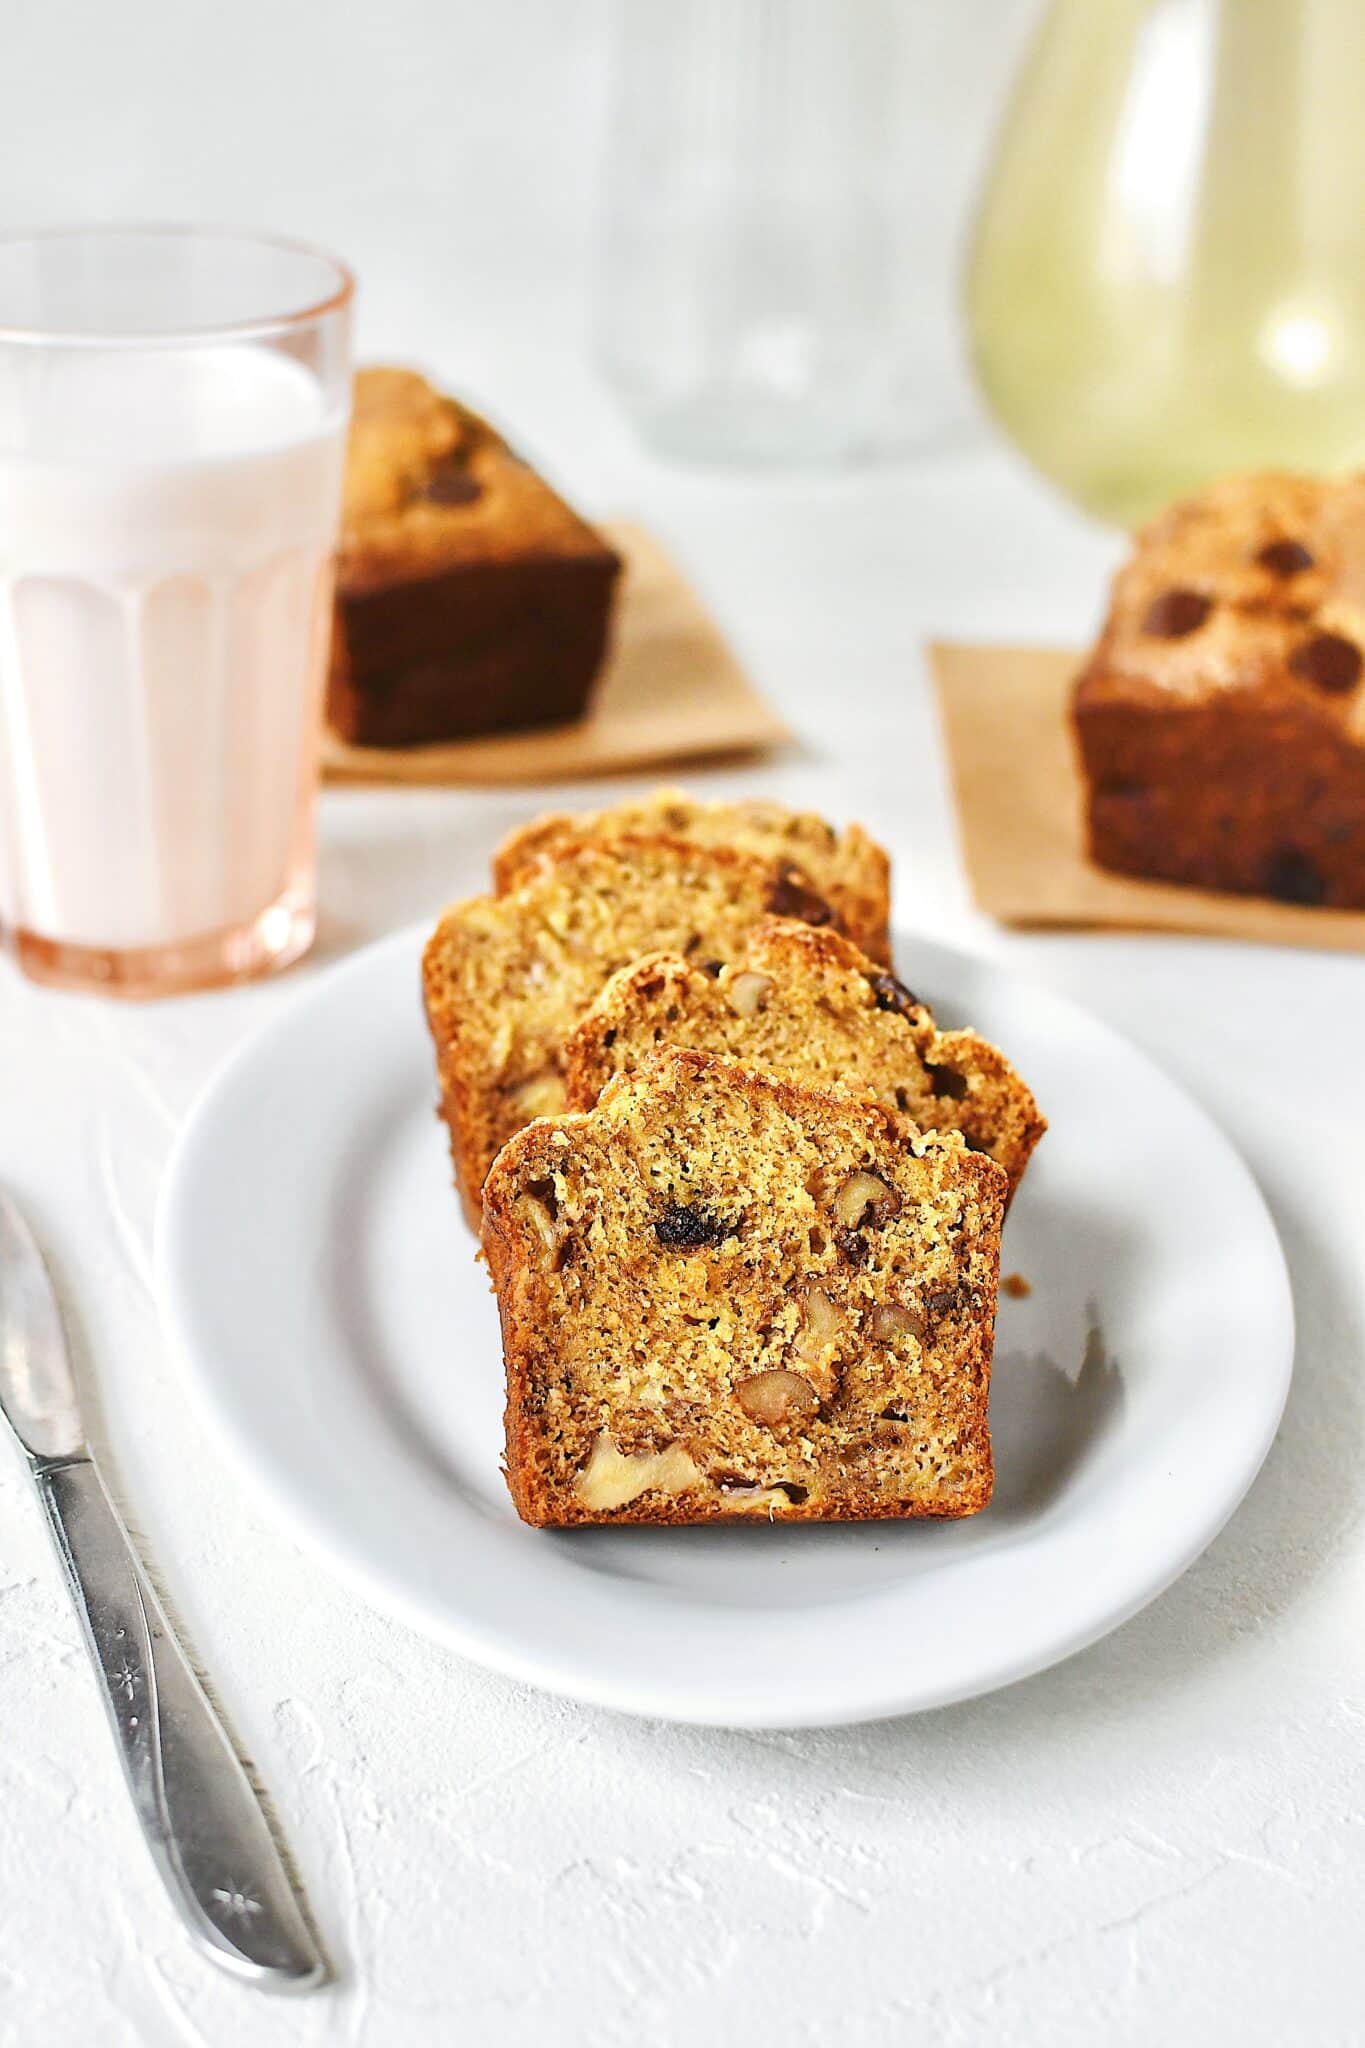 Slices of banana bread on a plate with a glass of milk nearby.